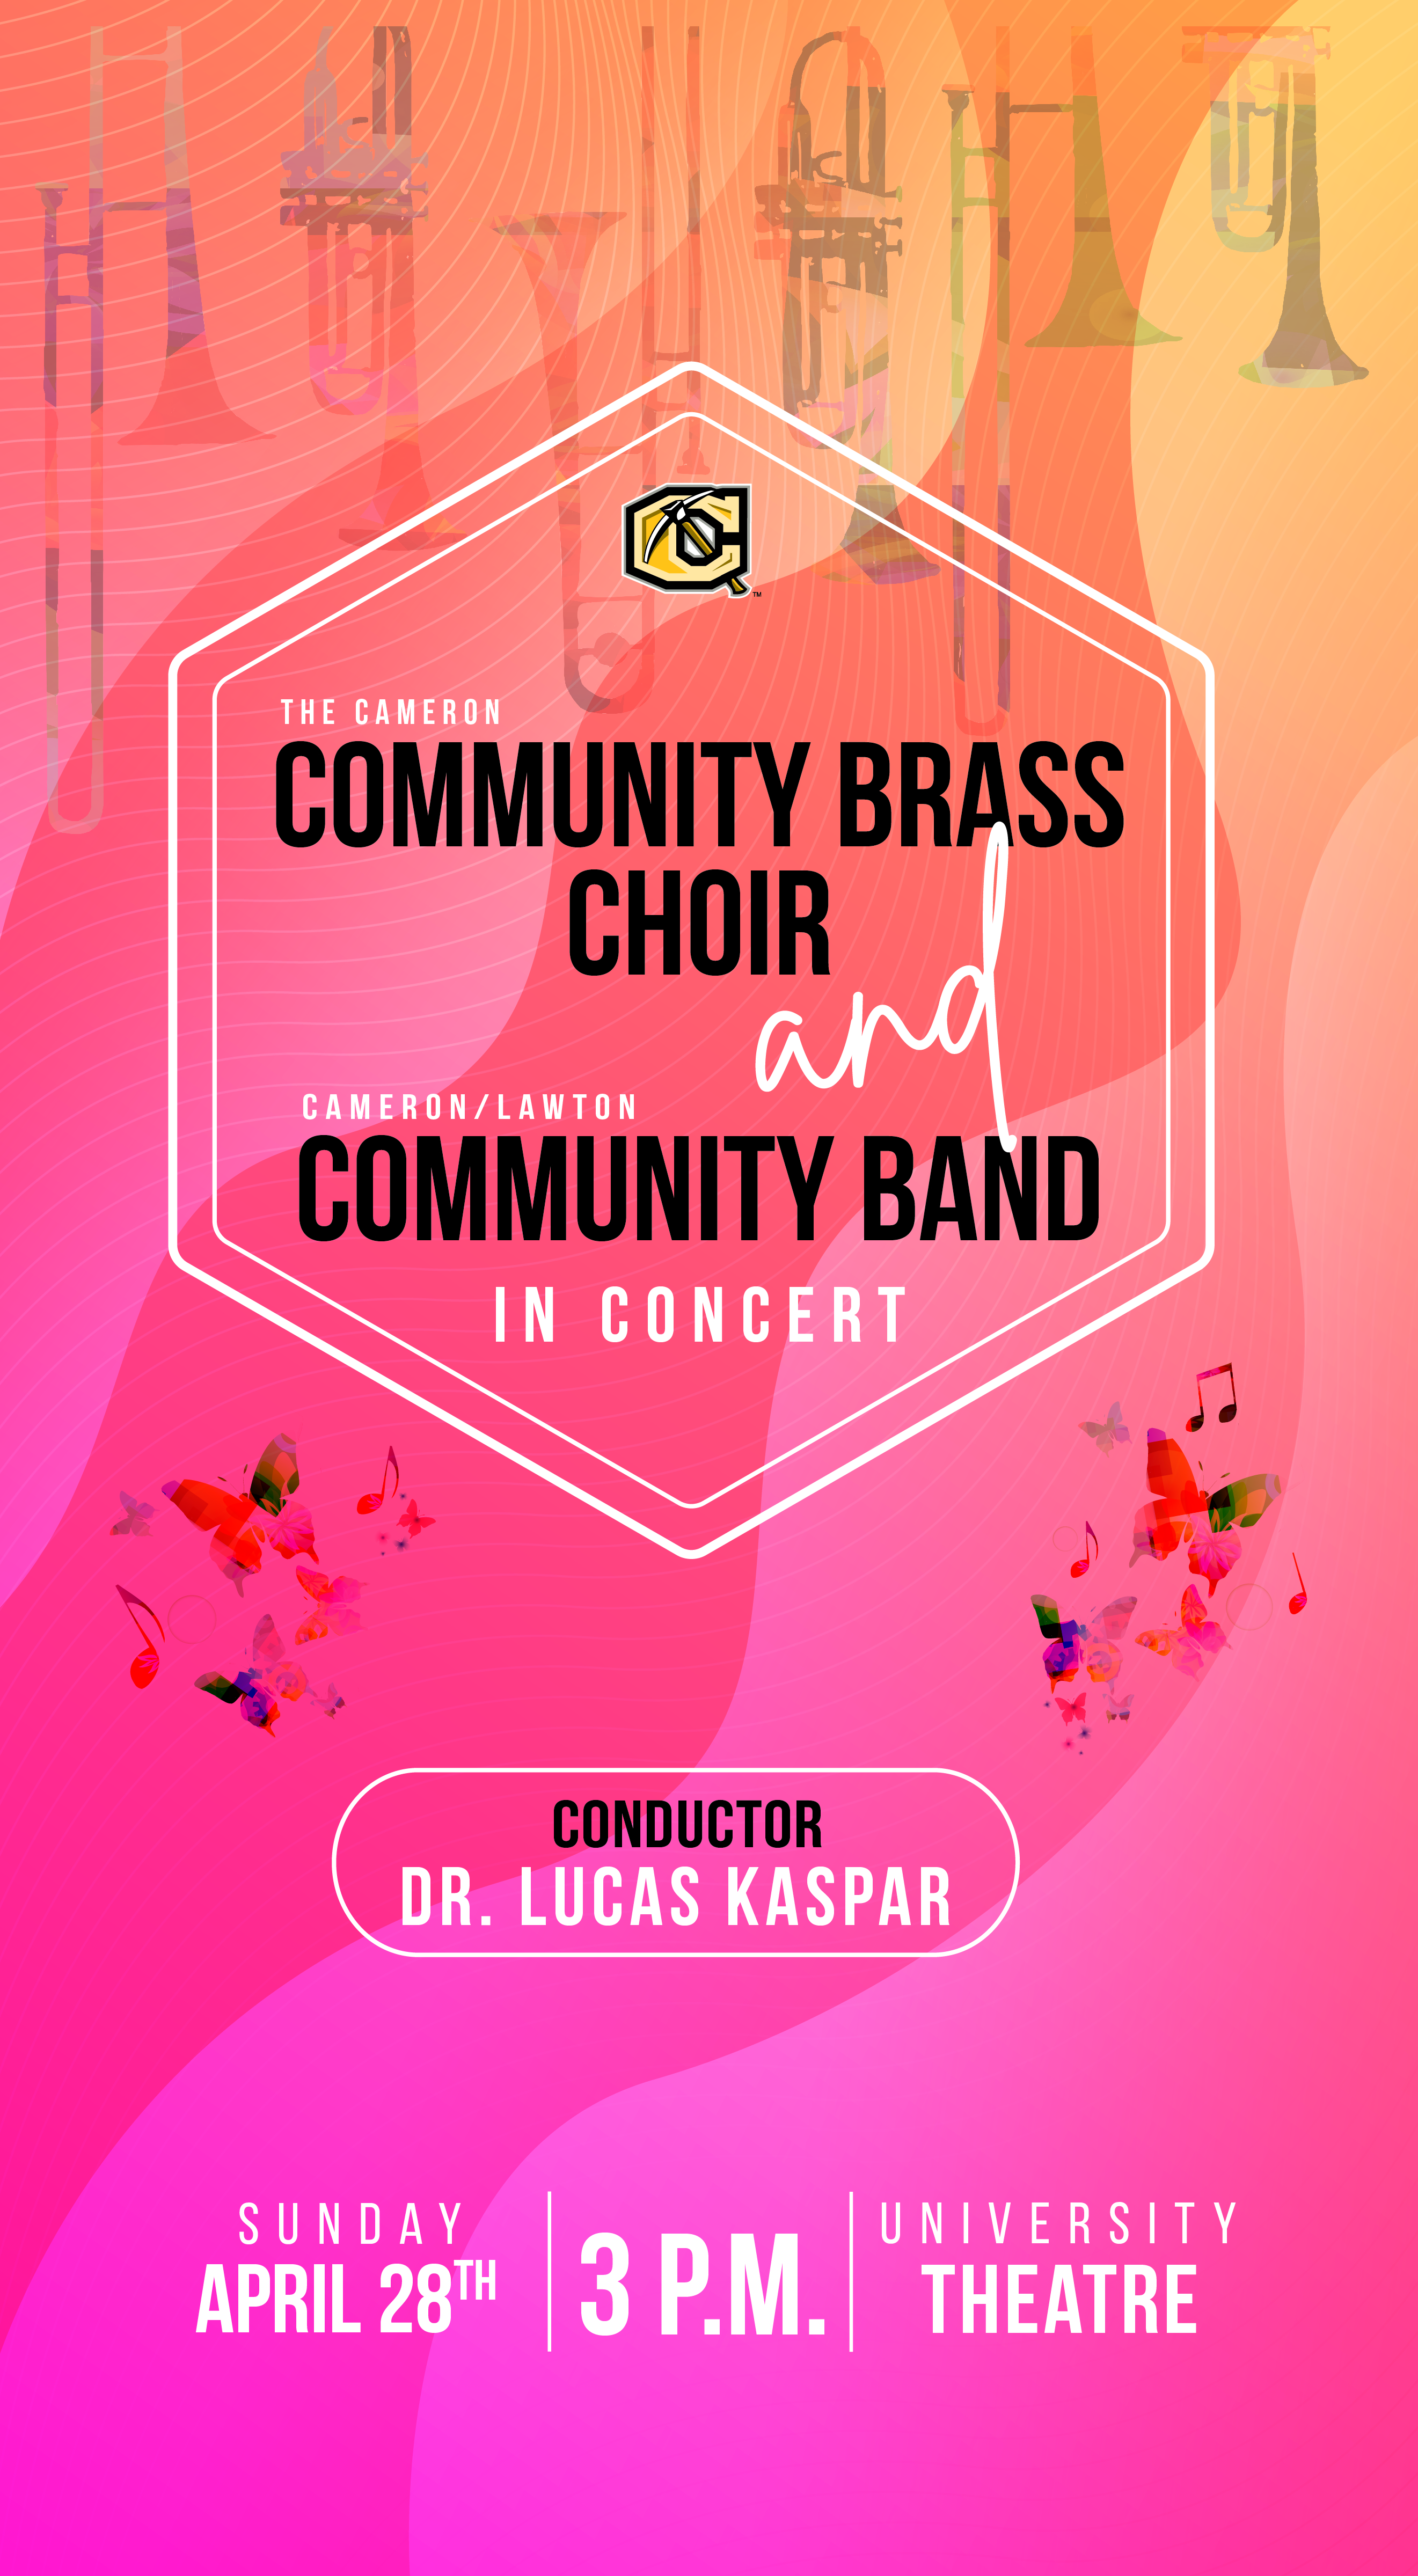 The Cameron Community Brass Choir and Cameron/Lawton Community Band in concert
Sunday April 28 3 p.m. university theatre